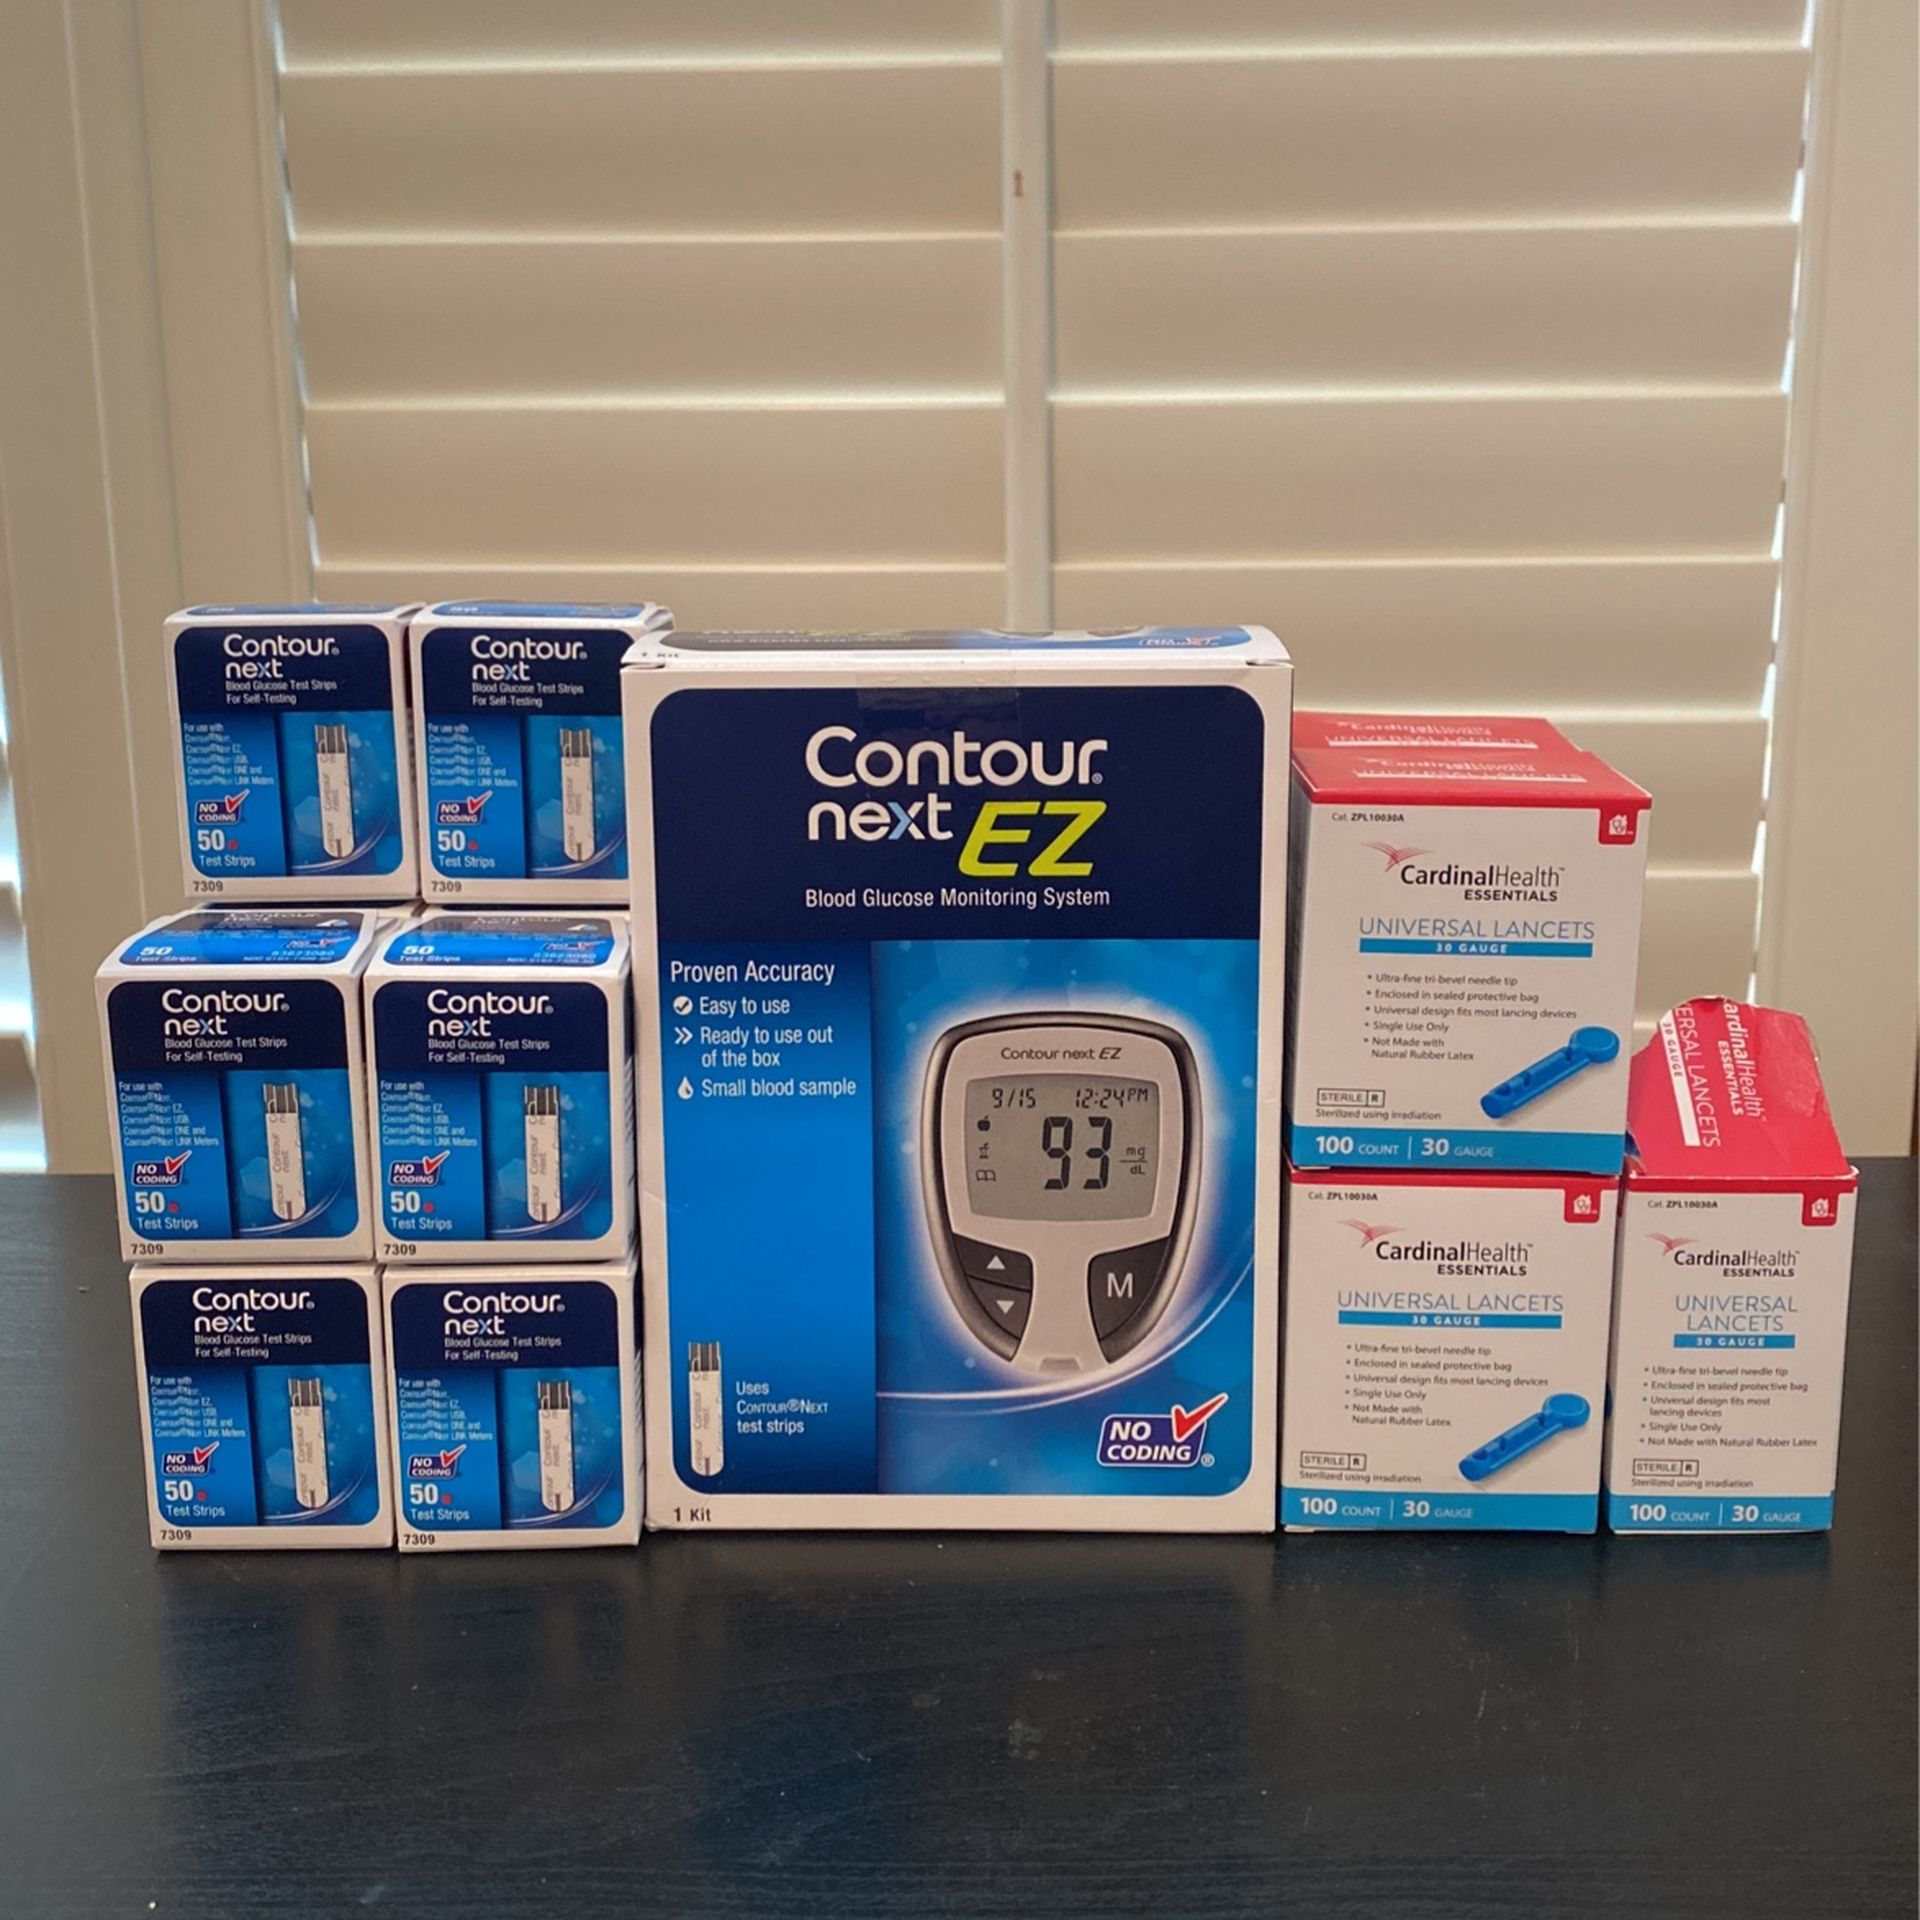 Contour Next EZ blood glucose monitoring system, test strips and universal lancets.